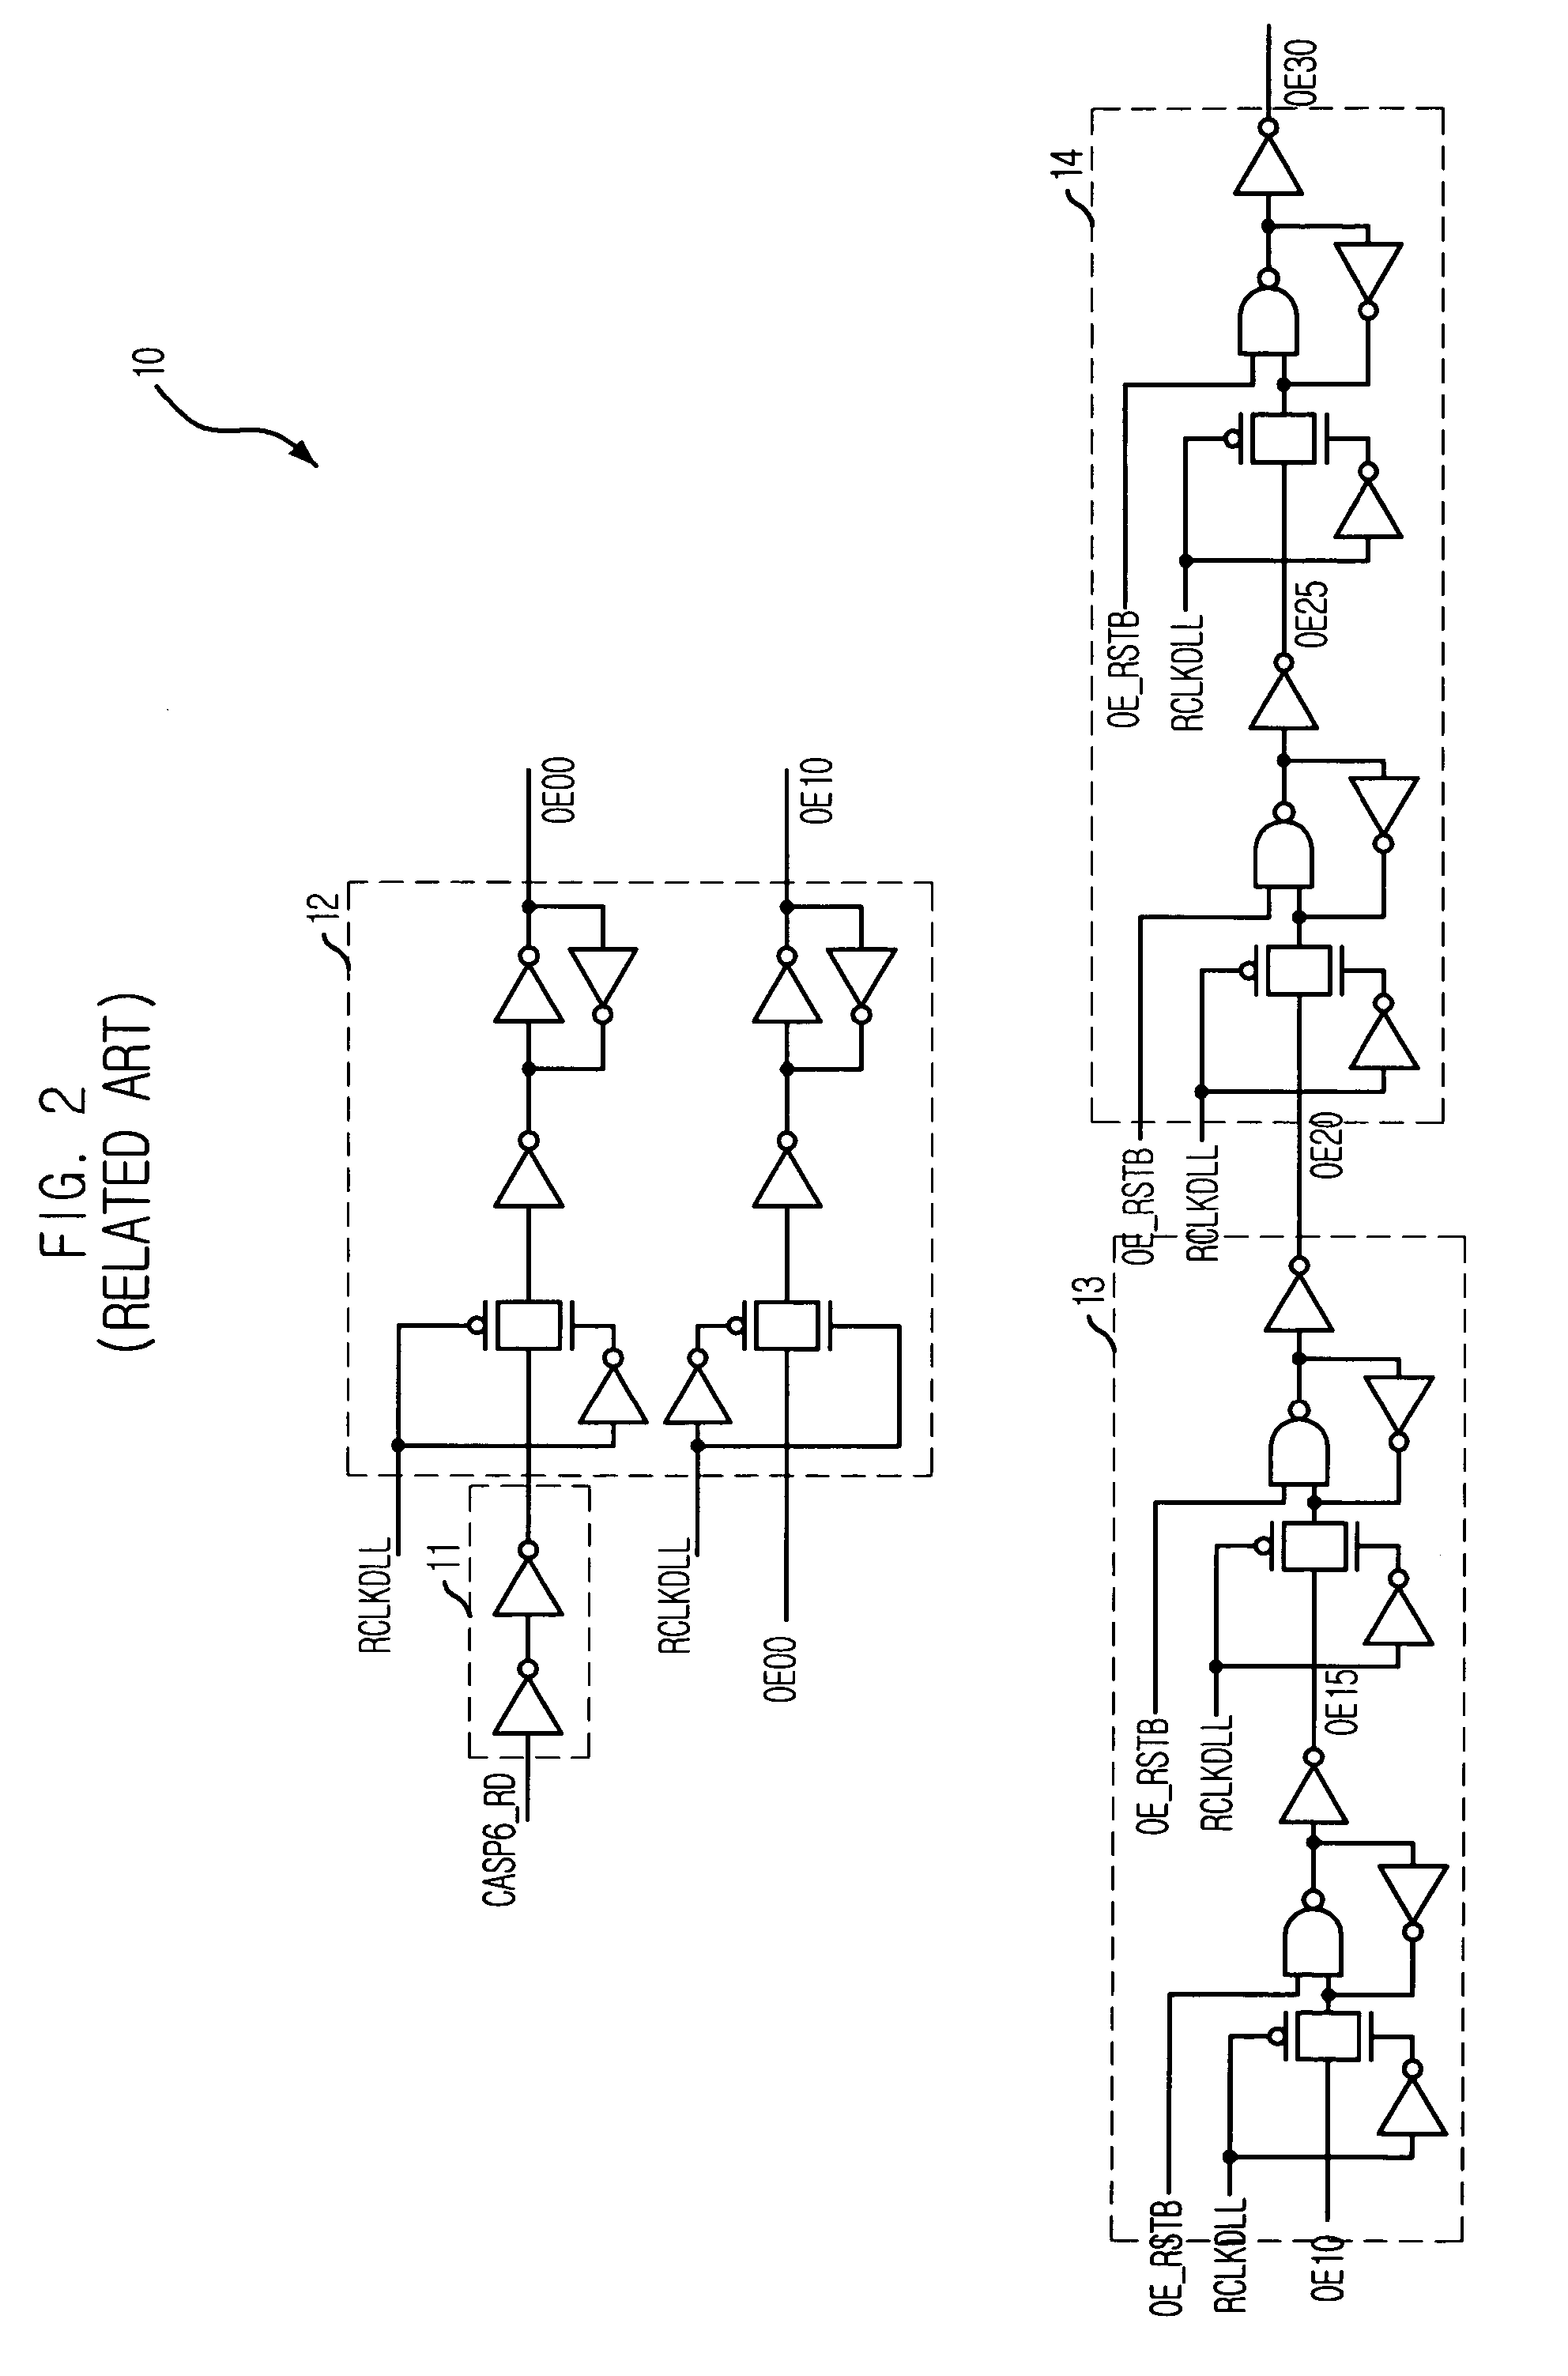 Output controller for controlling data output of a synchronous semiconductor memory device